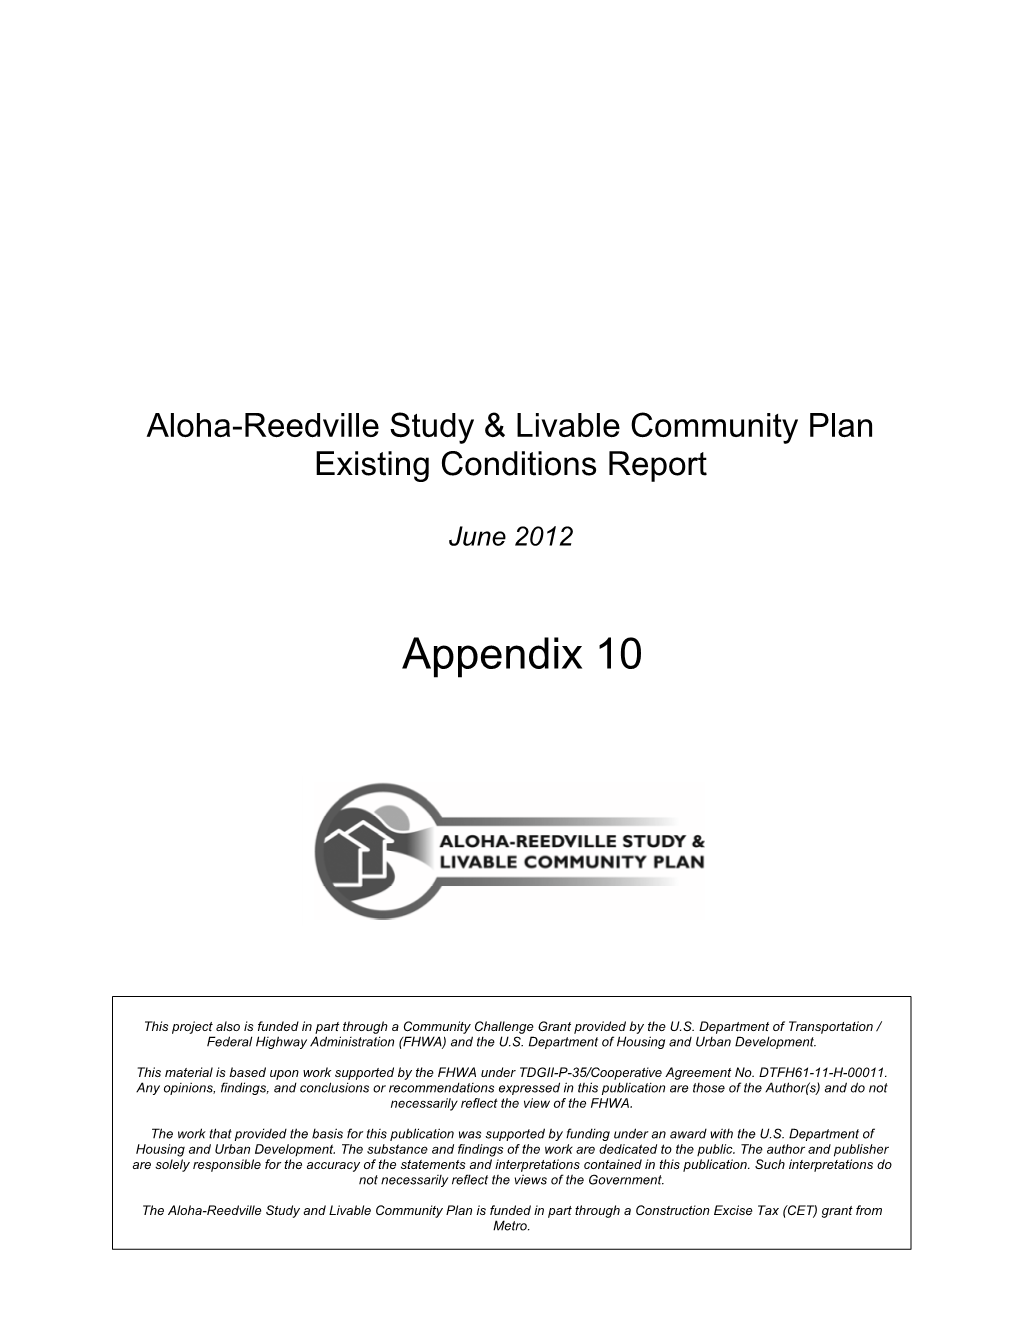 Aloha-Reedville Existing Conditions Report